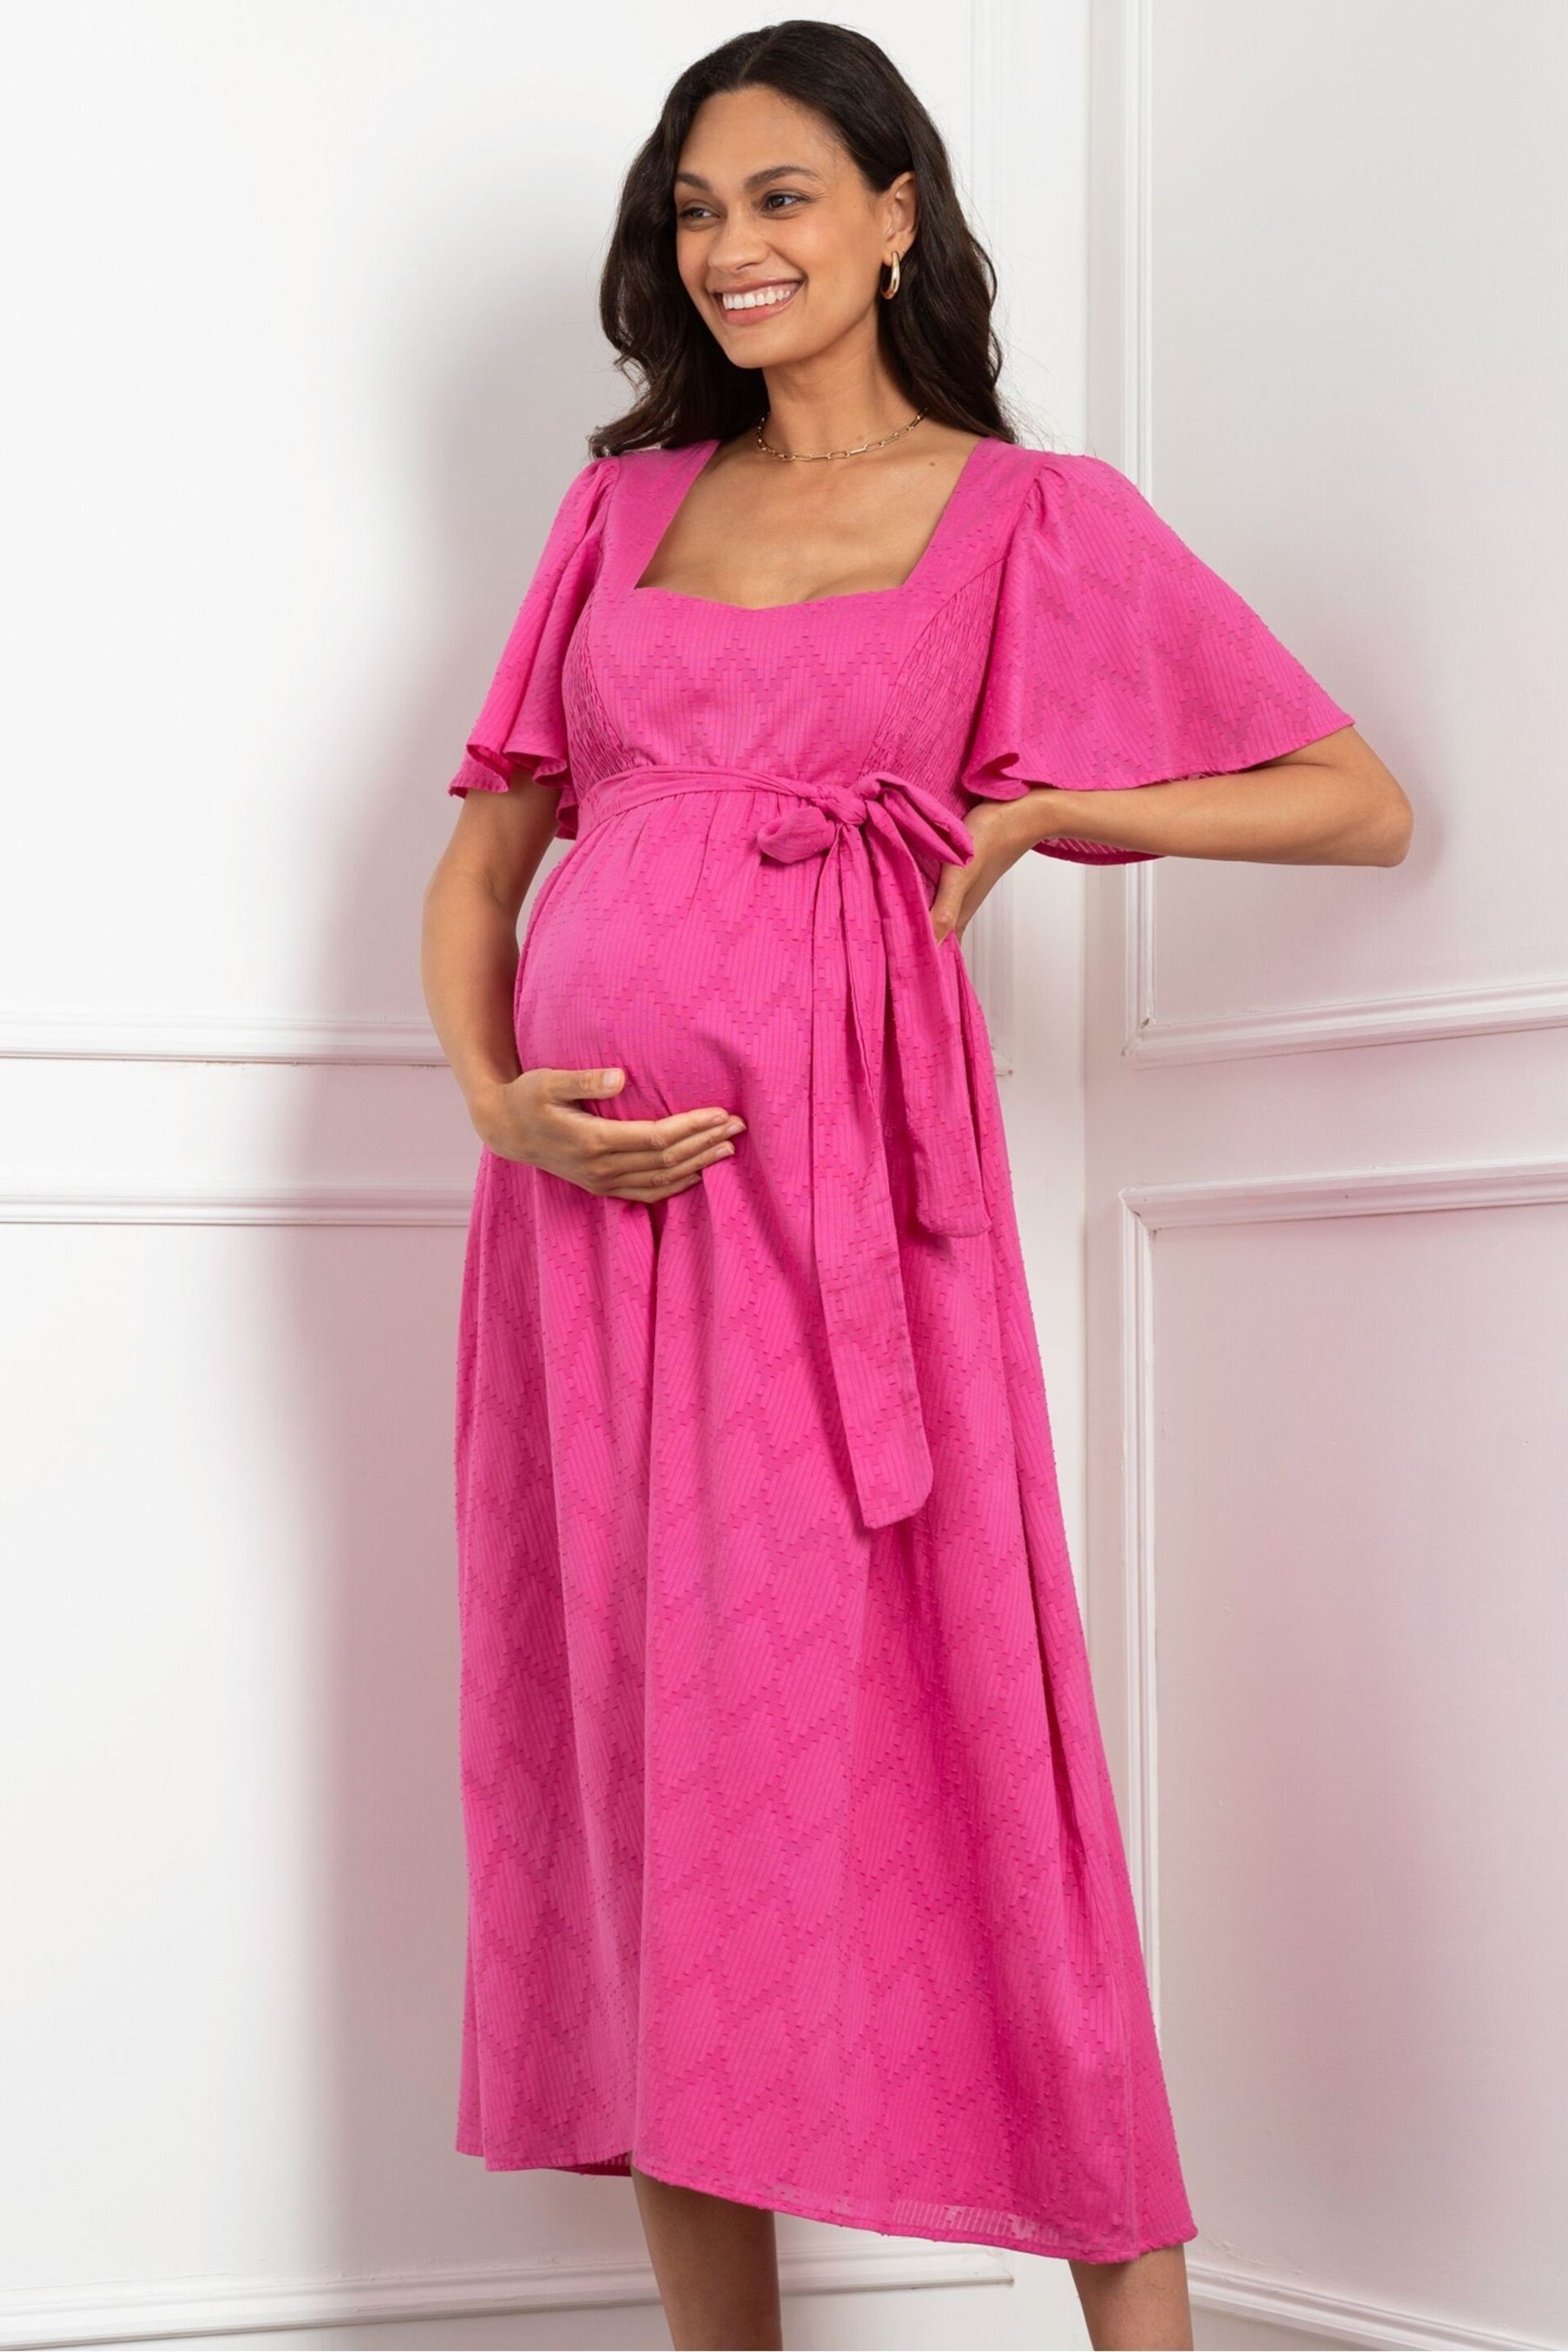 Seraphine Pink Cotton Broderie Maternity & Nursing Dress - Image 1 of 10